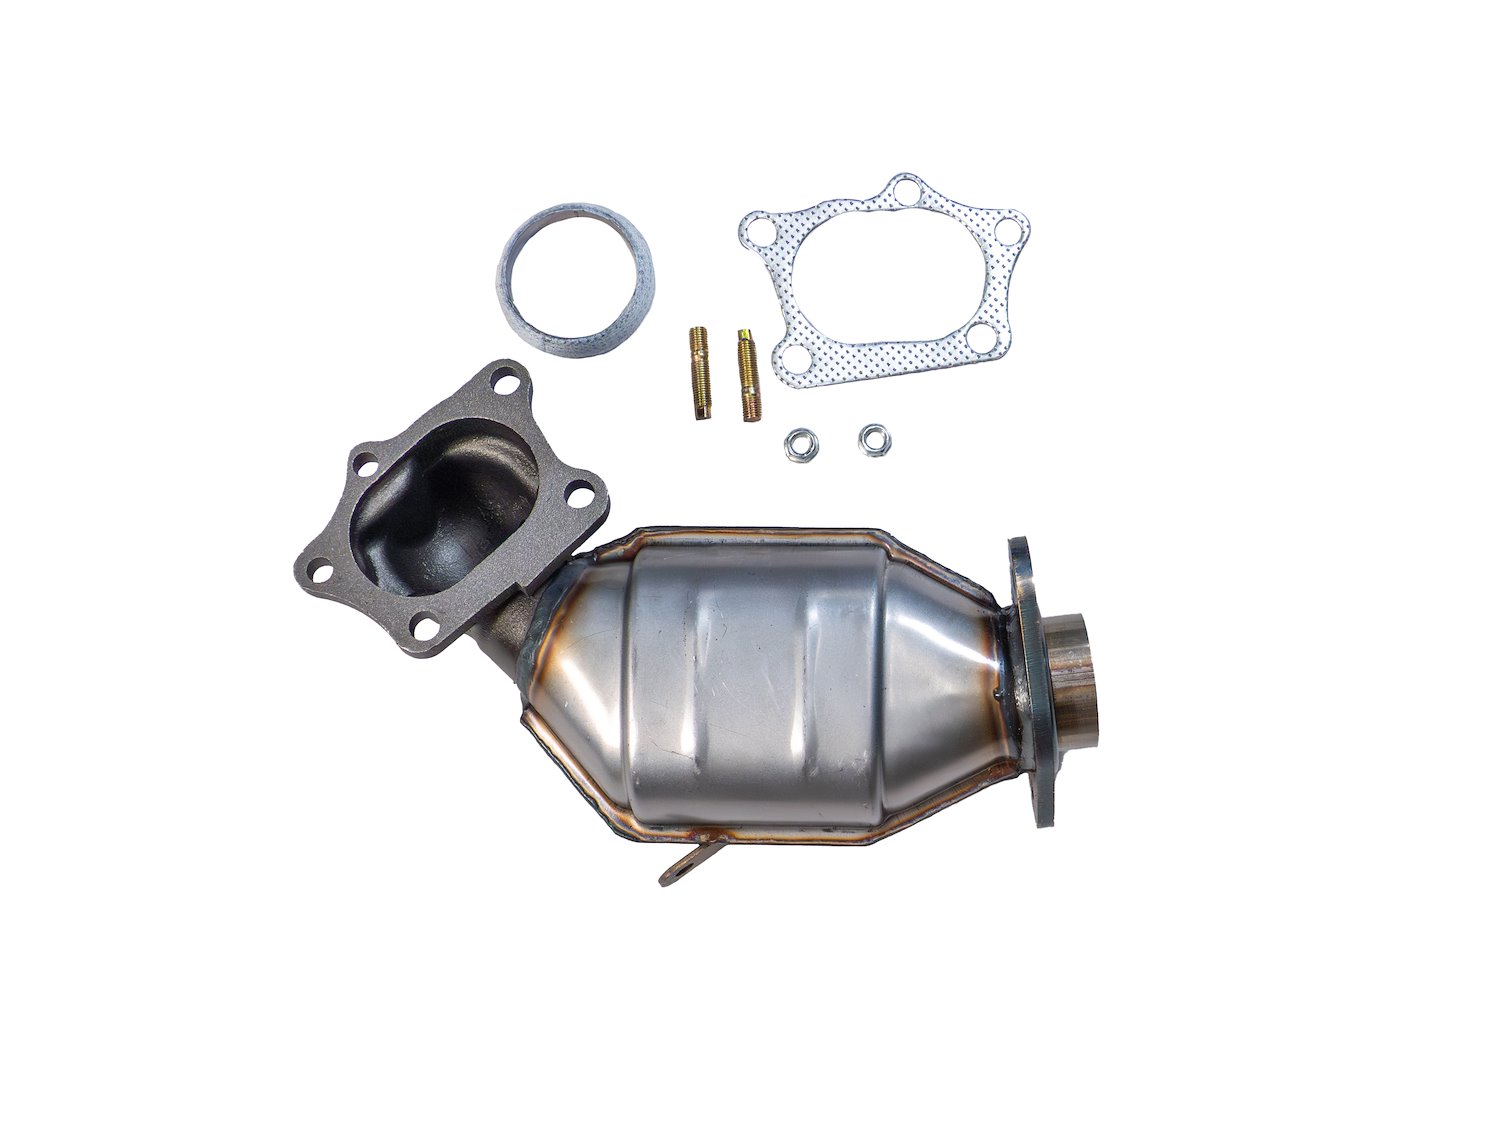 Catalytic Converter Fits 2007-2012 Mazda CX-7 w/2.3L Turbocharged 4 cyl. Eng. [Front]